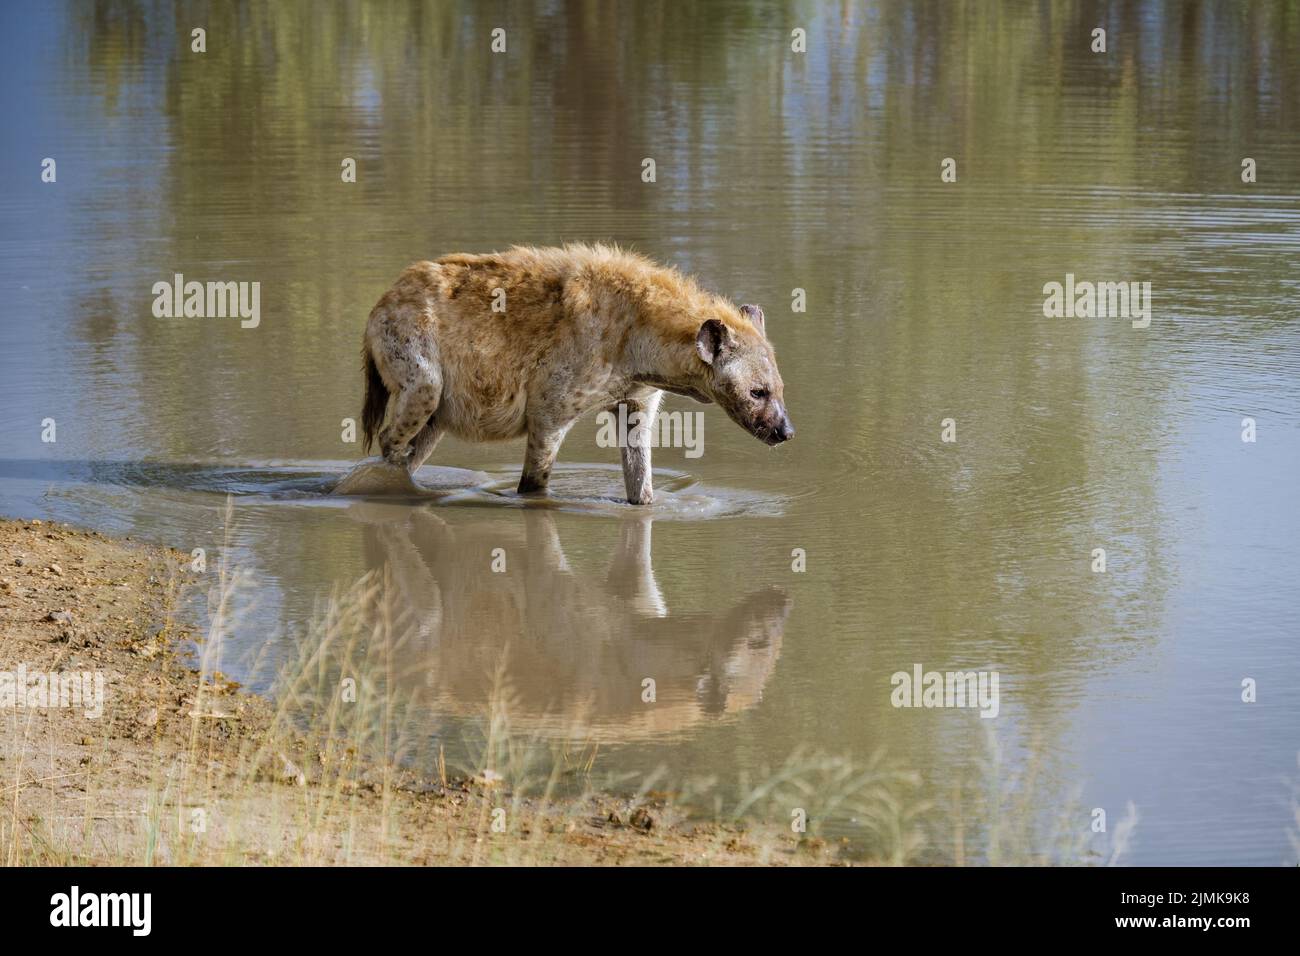 Pregnant Hyena, young hyena in Kruger national park South Africa, Hyena family in South Africa Stock Photo